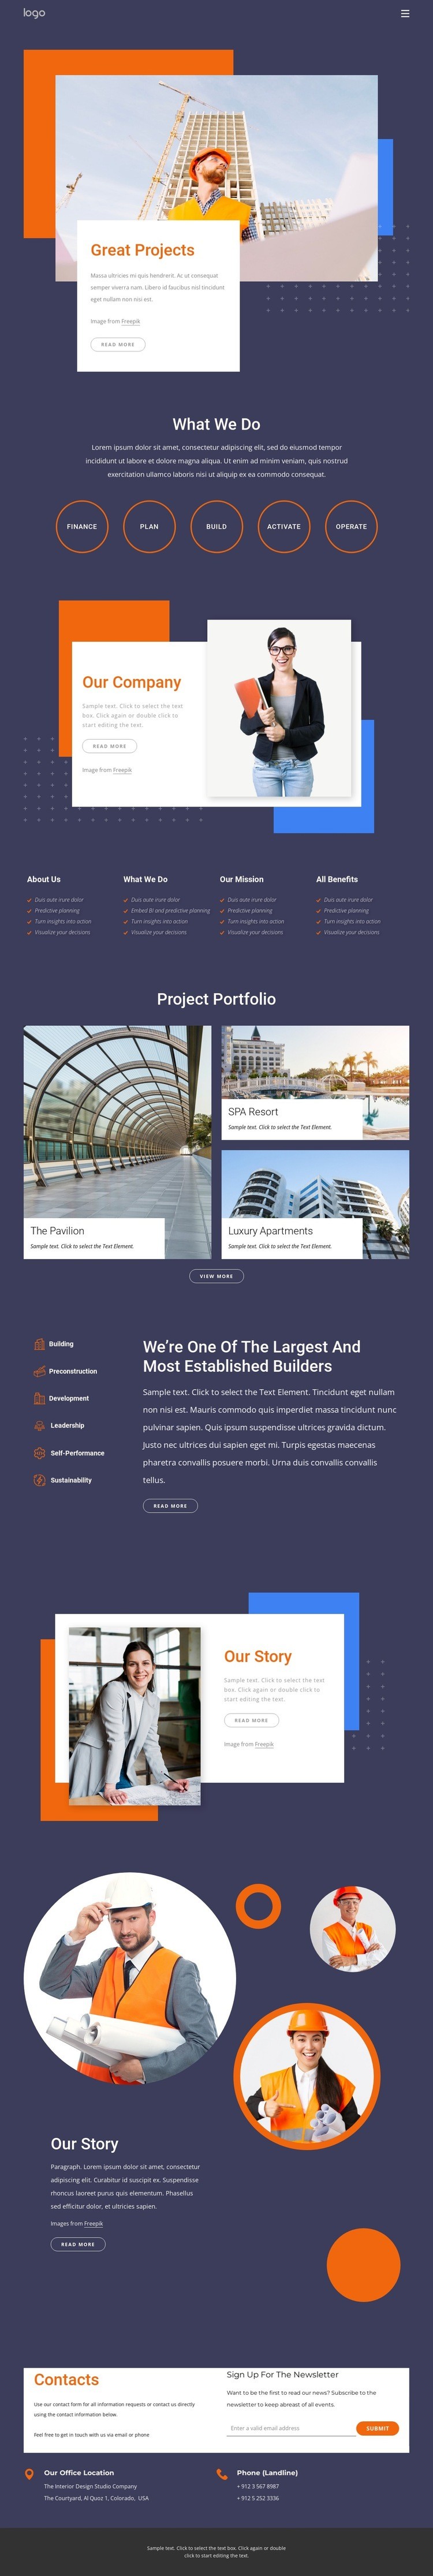 We specialise in delivering large complex building projects Squarespace Template Alternative